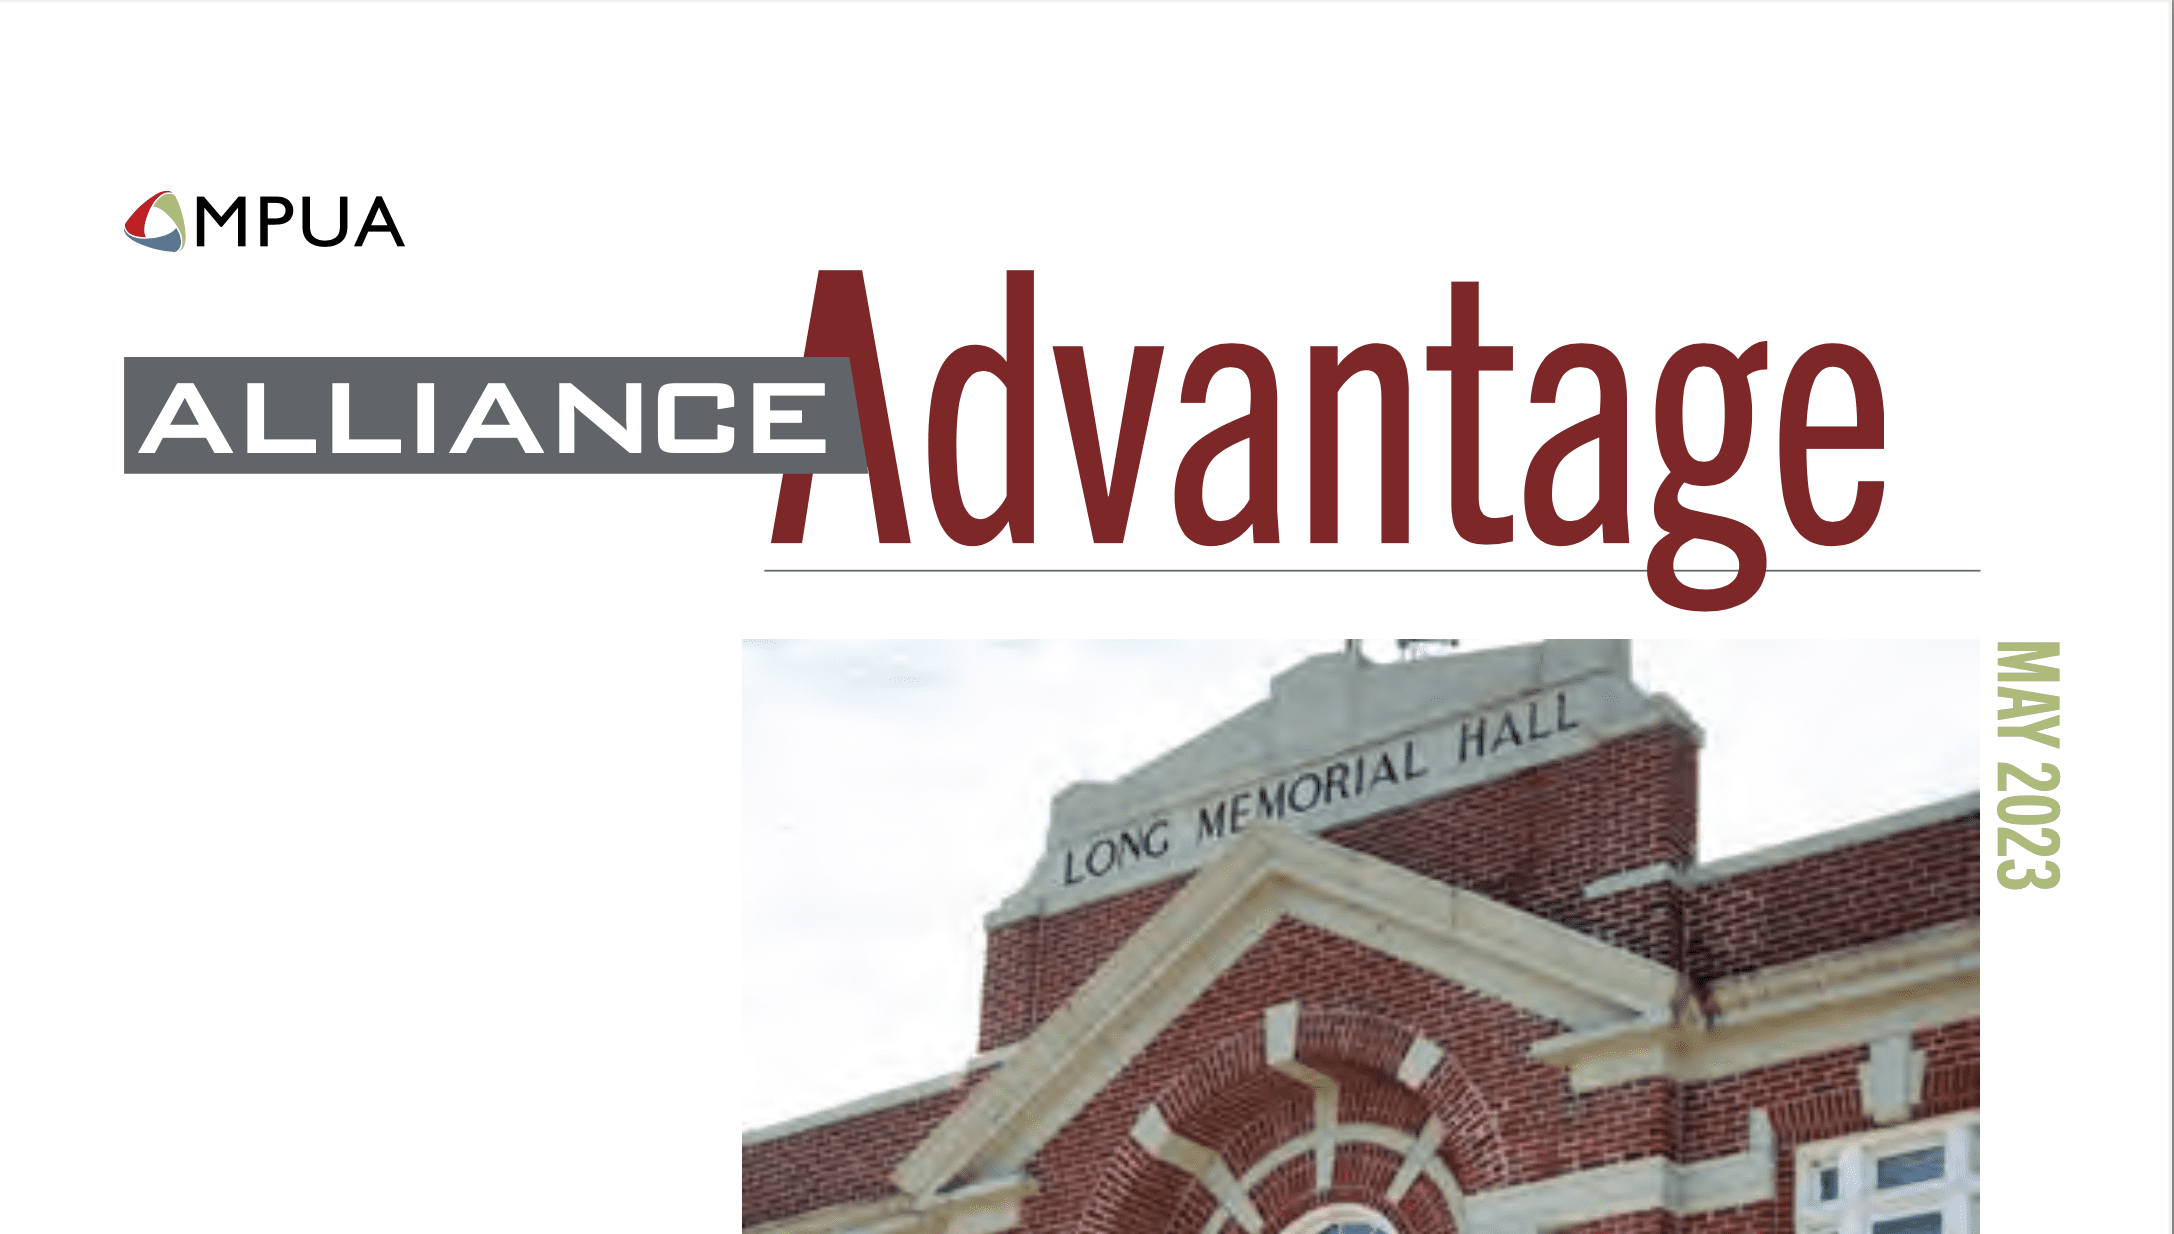 Kirkwood Electric Recognizes LUZCO Technologies in the May Issue of The MPUA “Alliance Advantage”